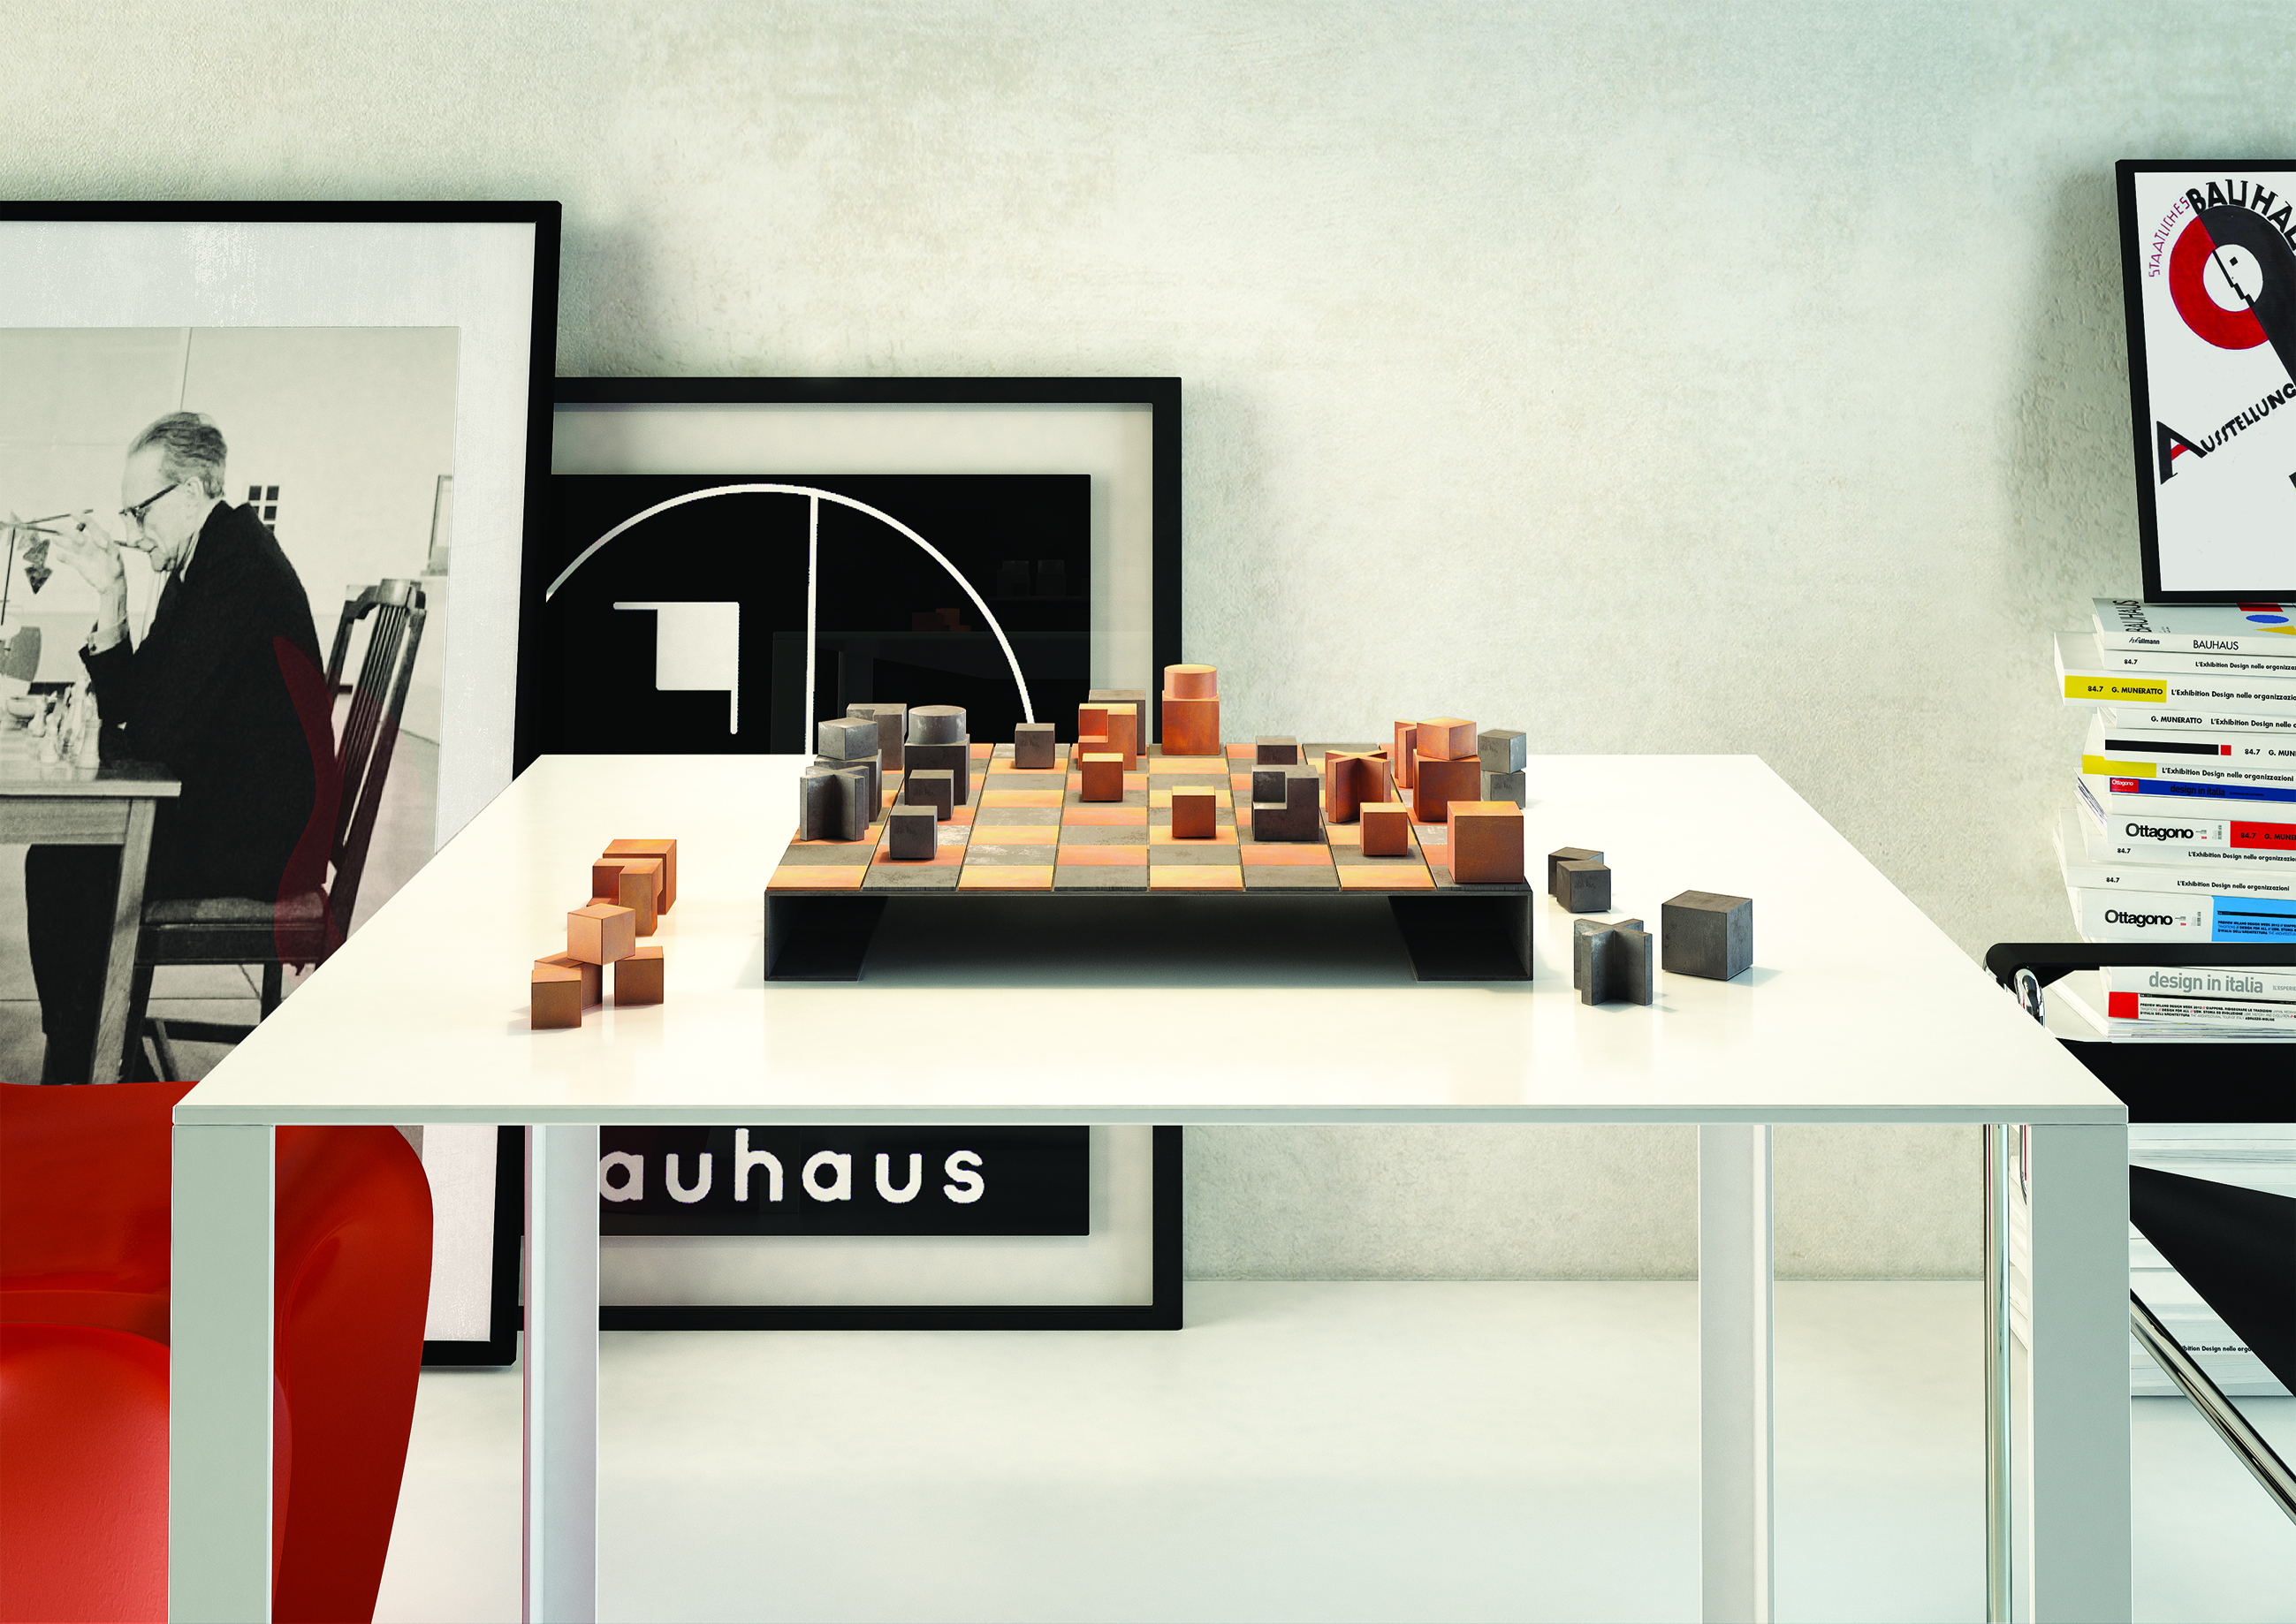 J. Hartwig, Chessboard of Bauhaus, 1924, redesigned in metal by S. D’Amato, BNP, in 2016 (render by S. Albano)